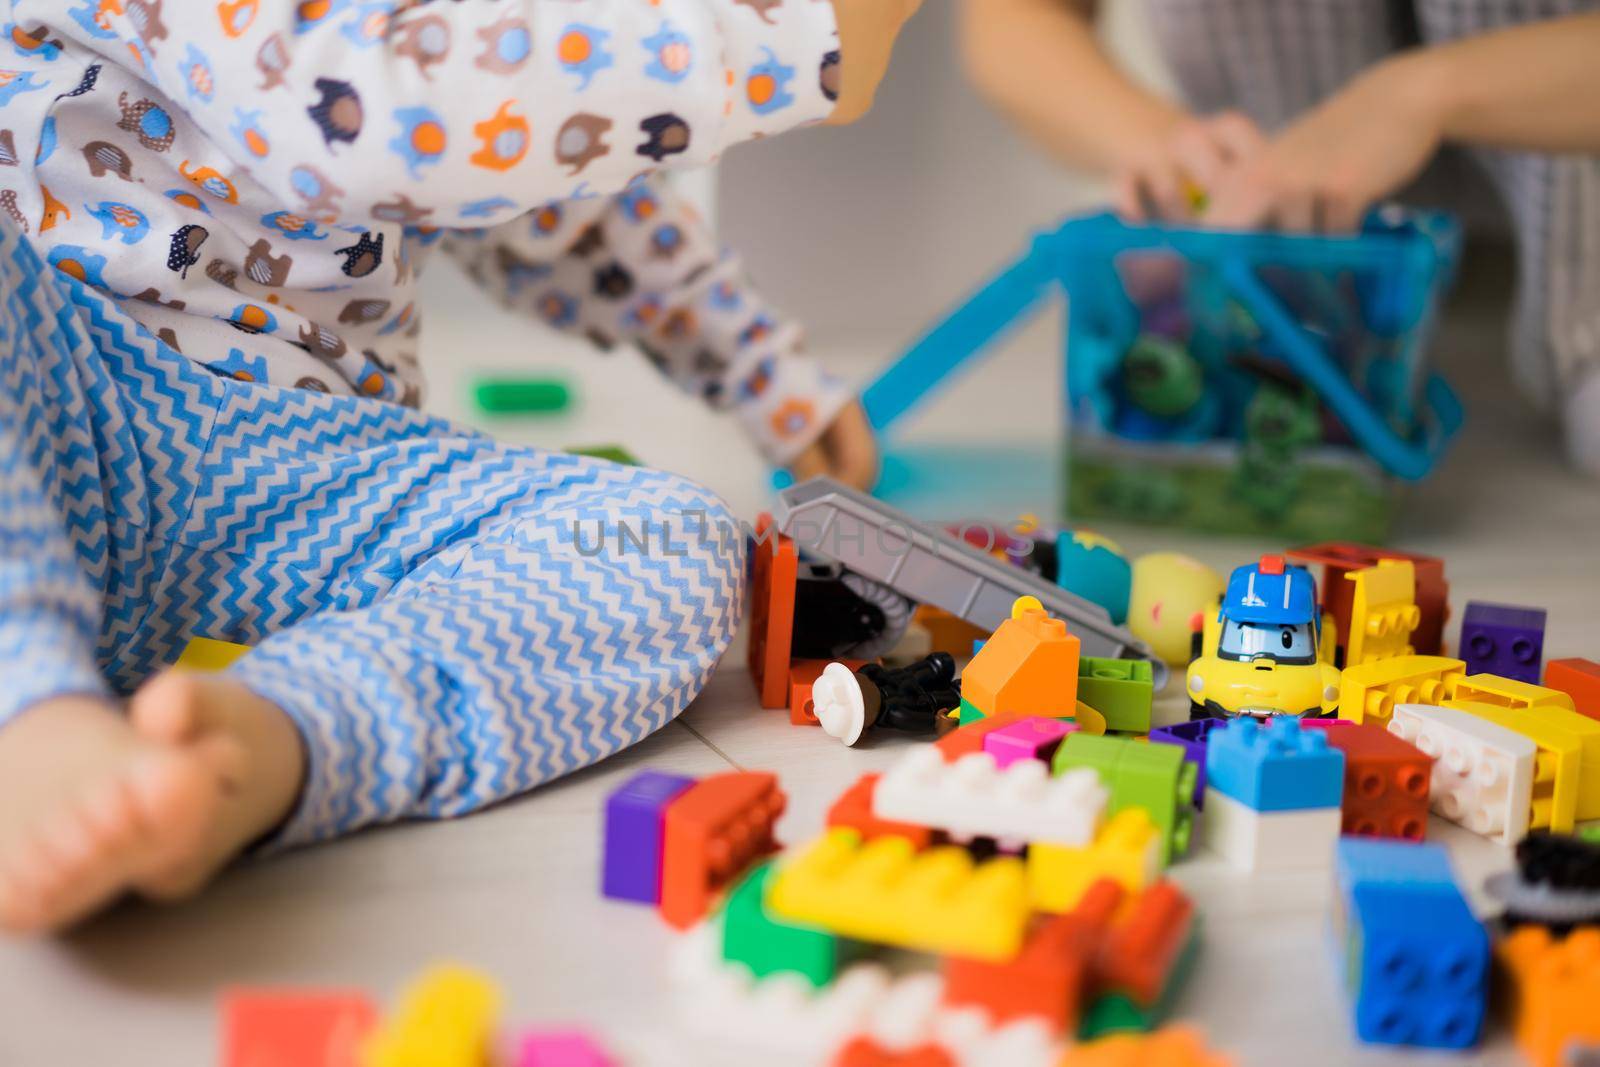 boy child playing with his mother in color children's building kit. The details of the children's building kit are scattered on the floor.